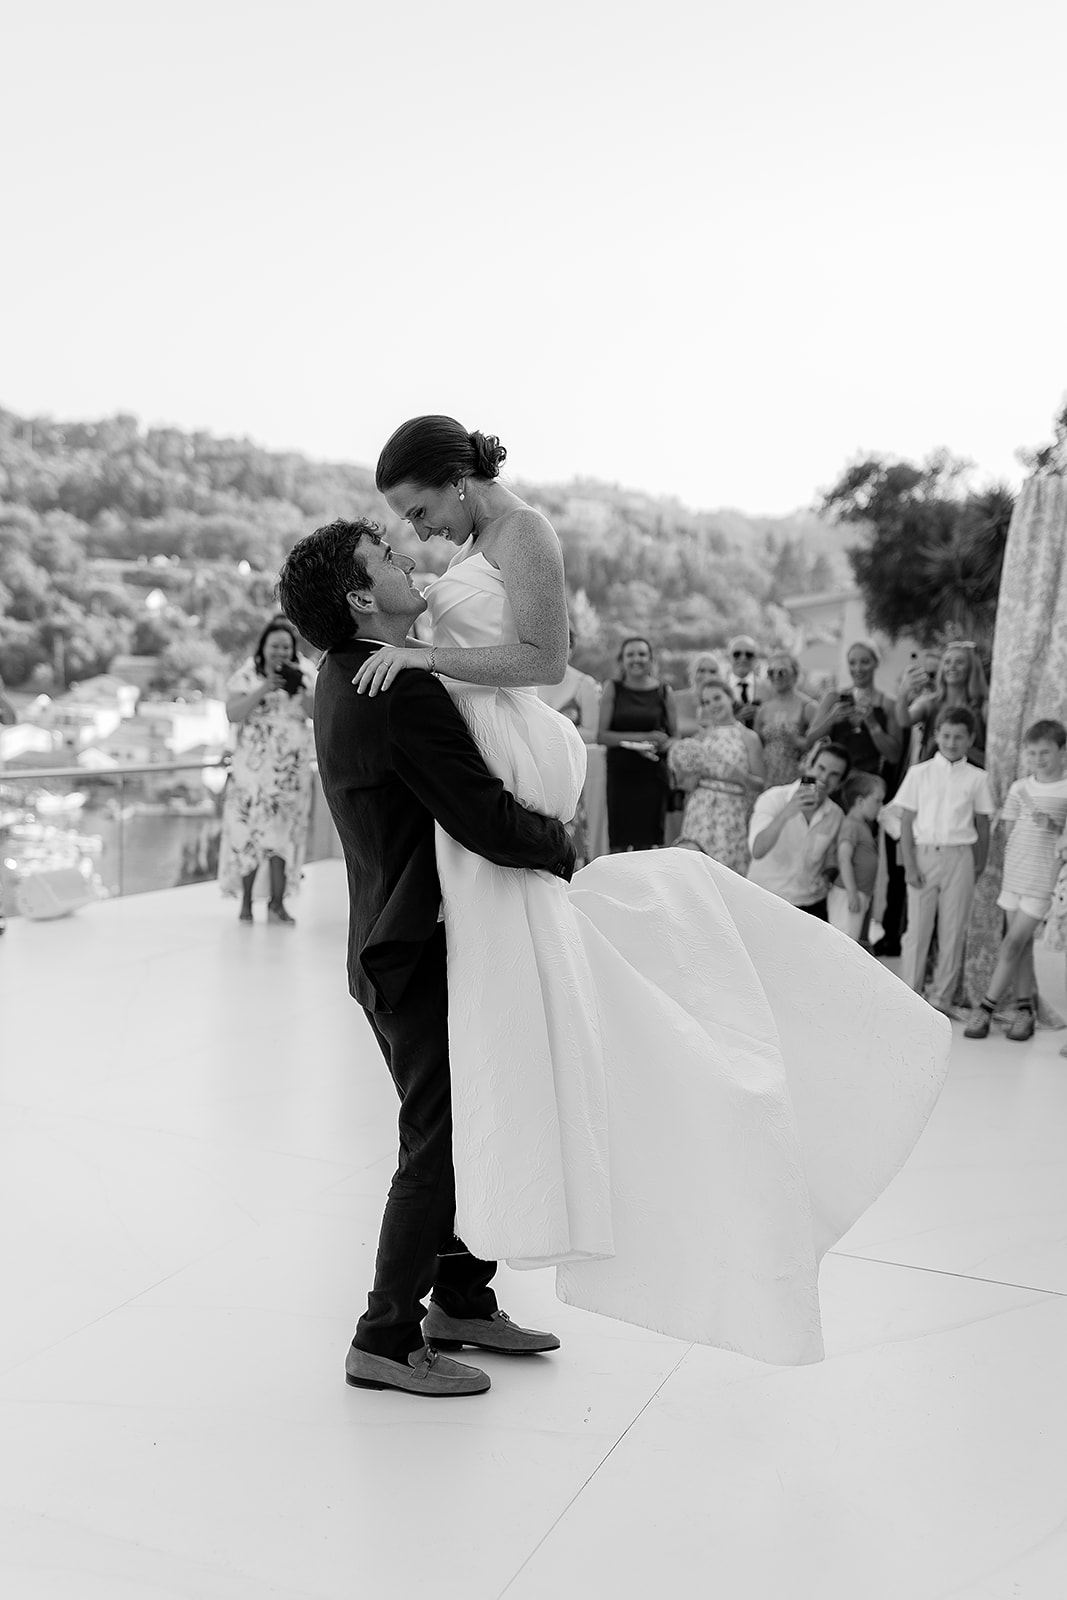 First dance in Paxos, Greece overlooking Loggos port.